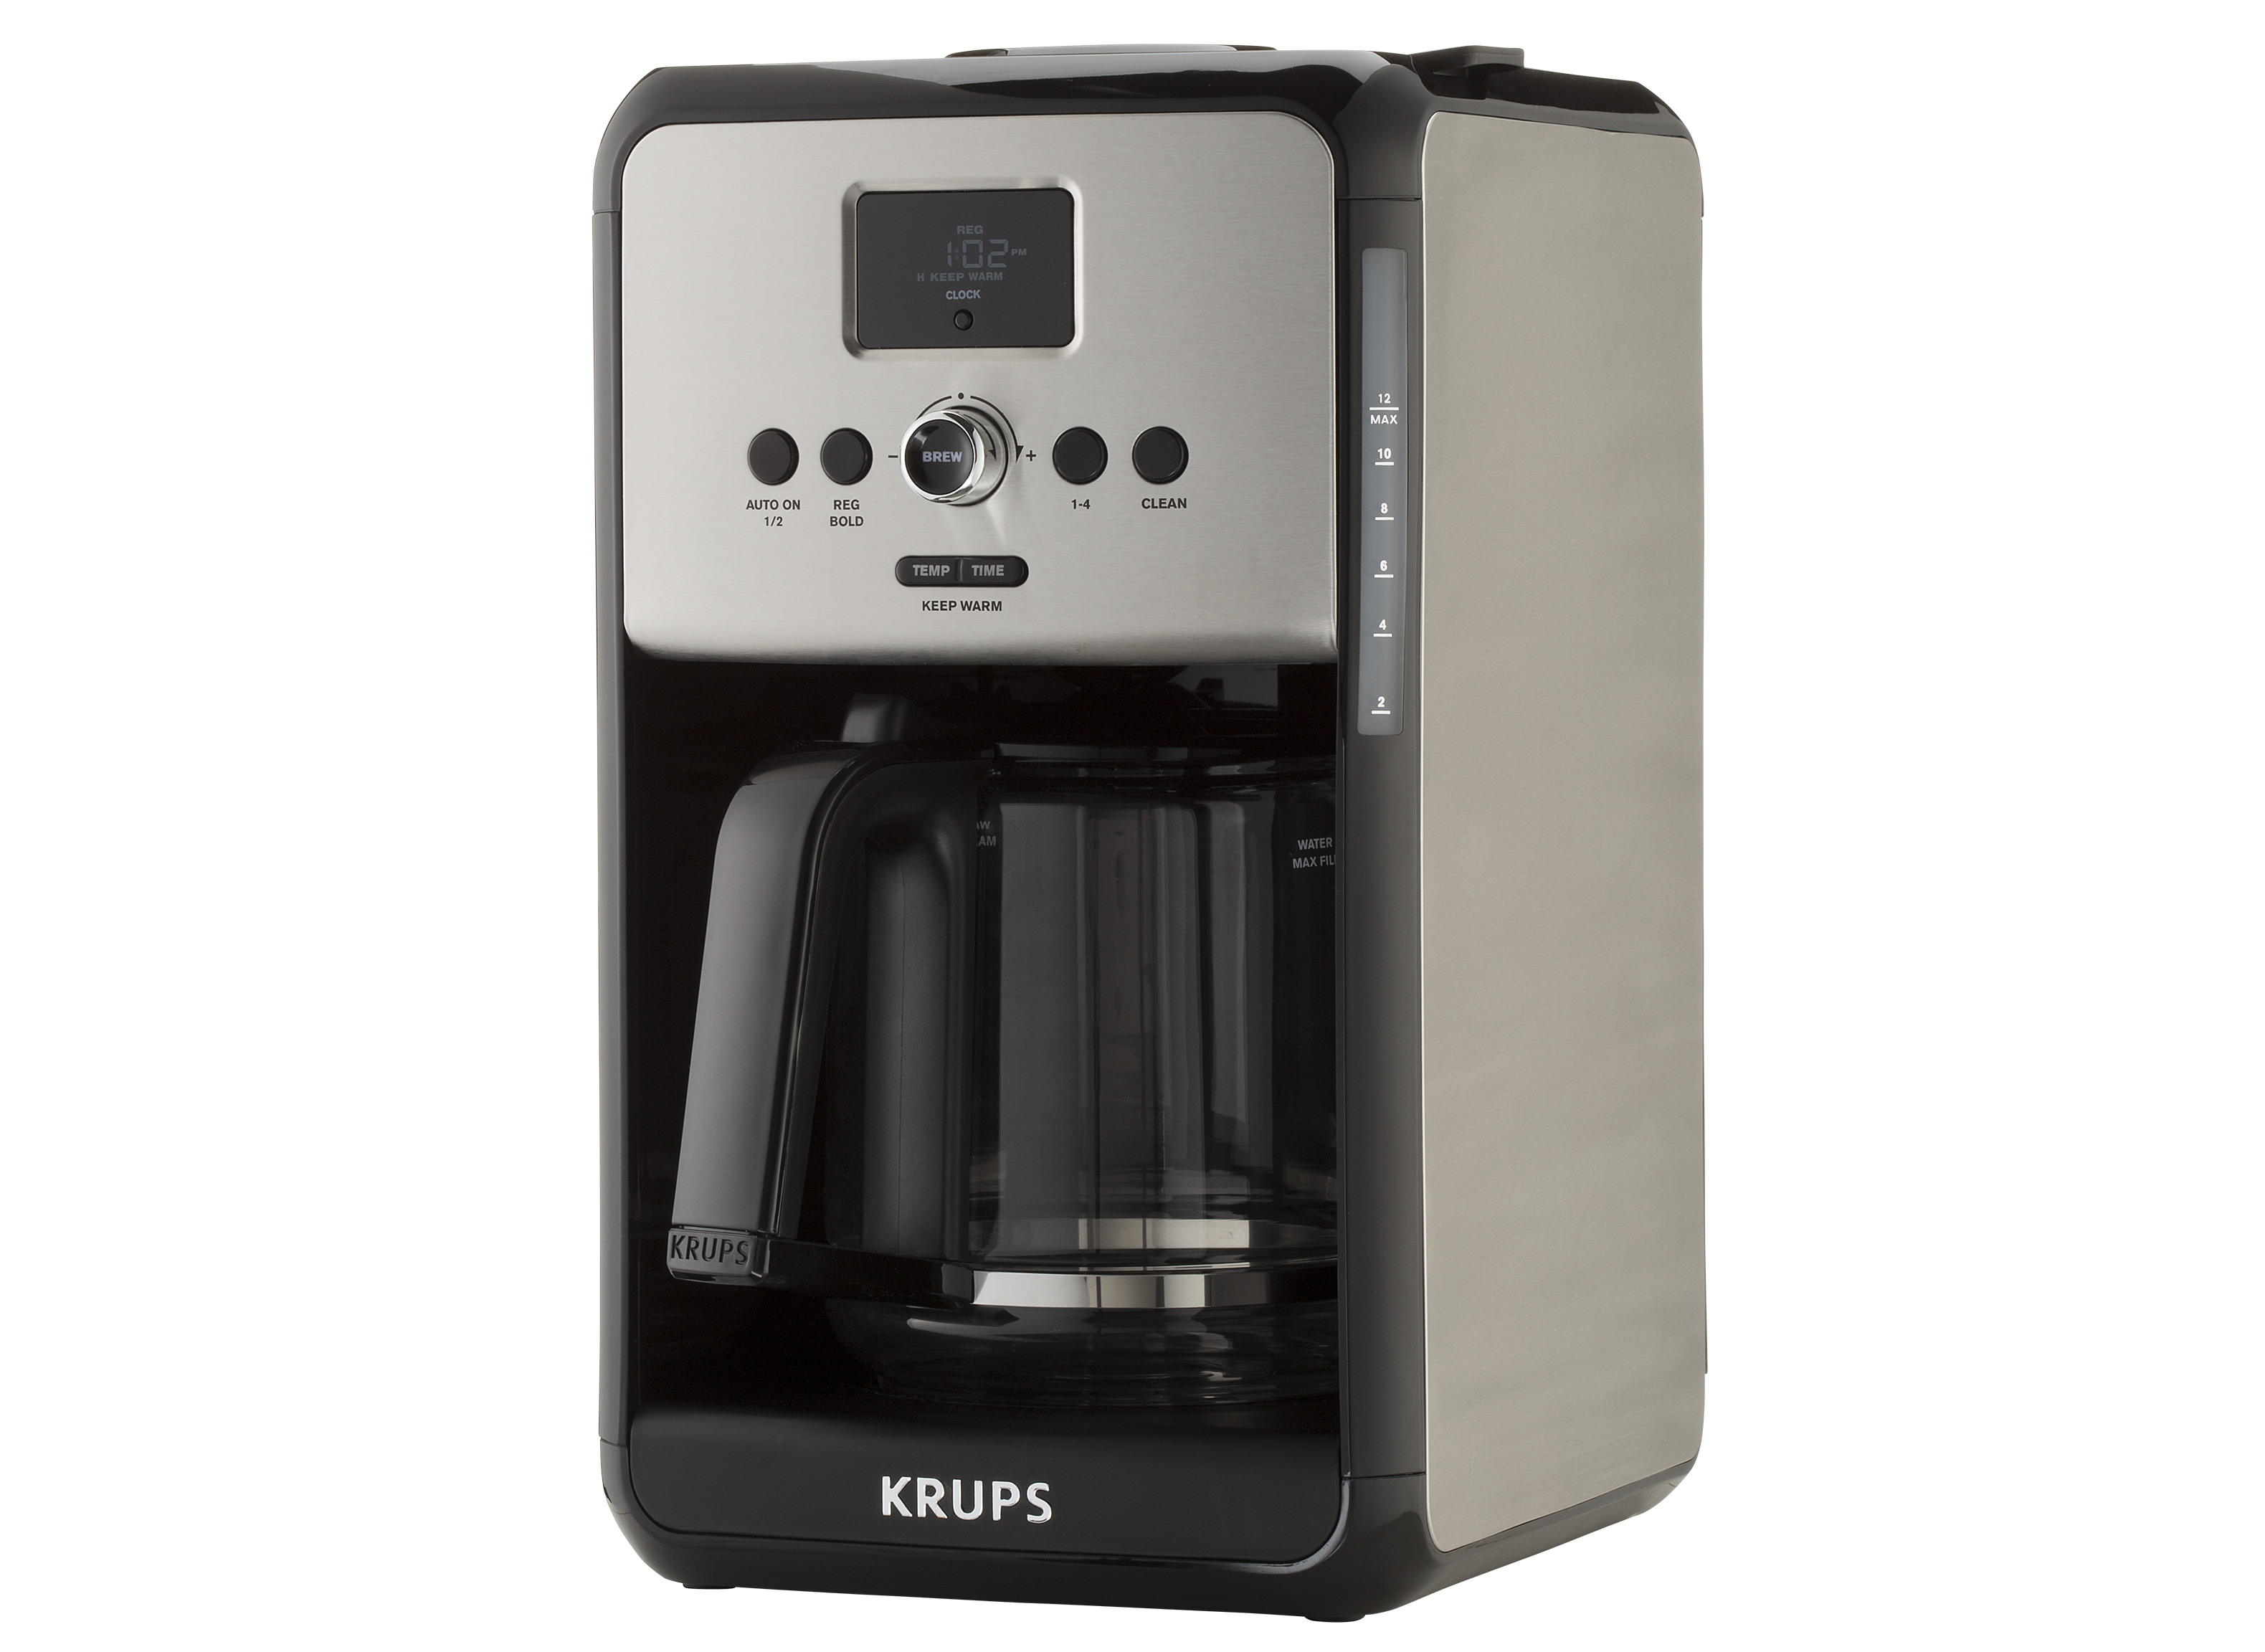 https://crdms.images.consumerreports.org/prod/products/cr/models/384686-coffeemakers-krups-savoyec314.png